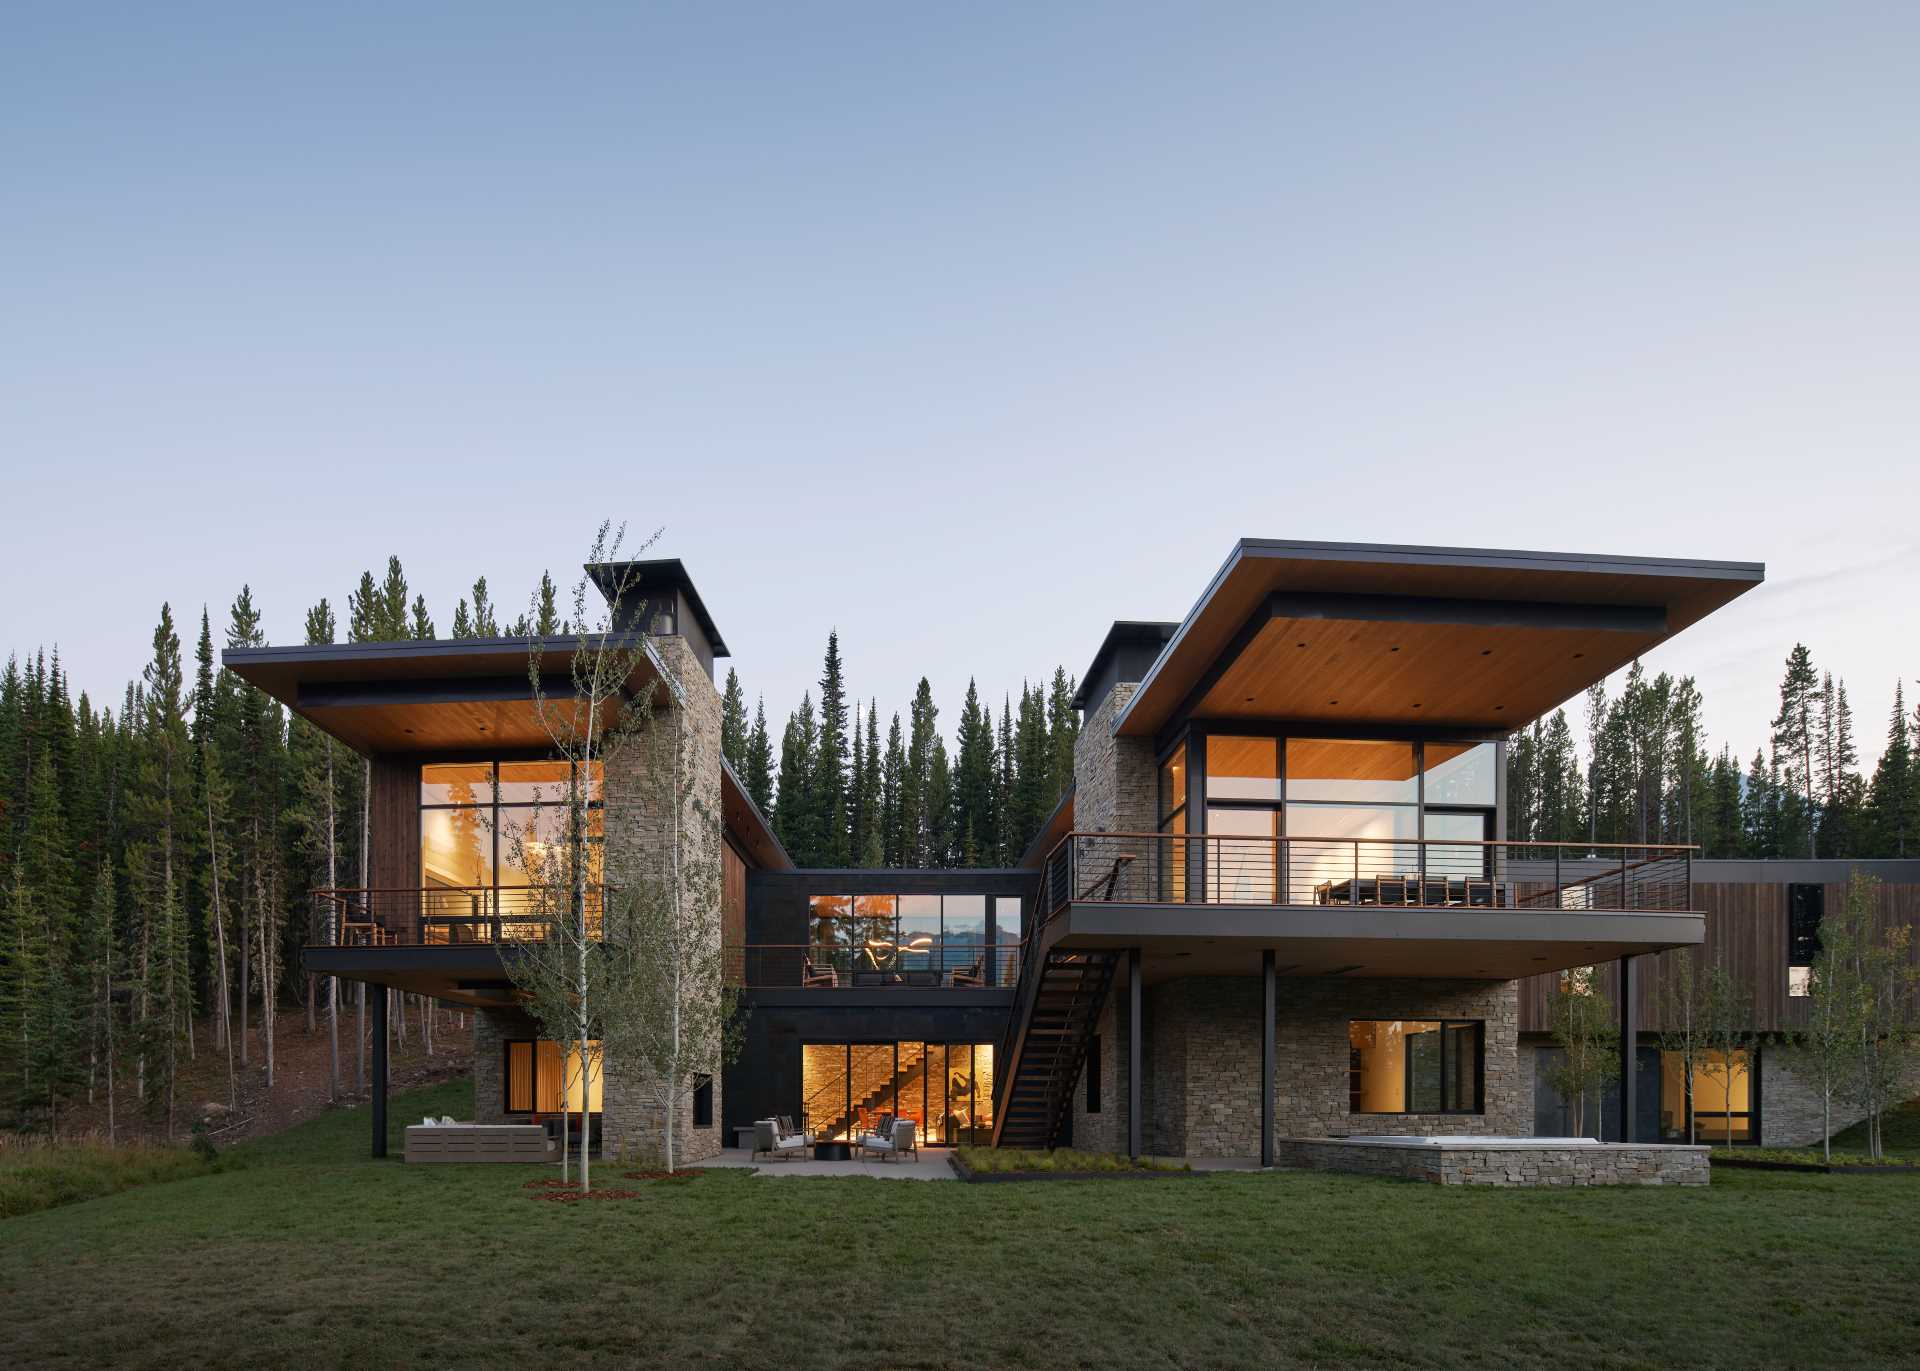 CLB Architects has sent us photos of a mountain retreat they designed in a densely forested area of Big Sky, Montana.